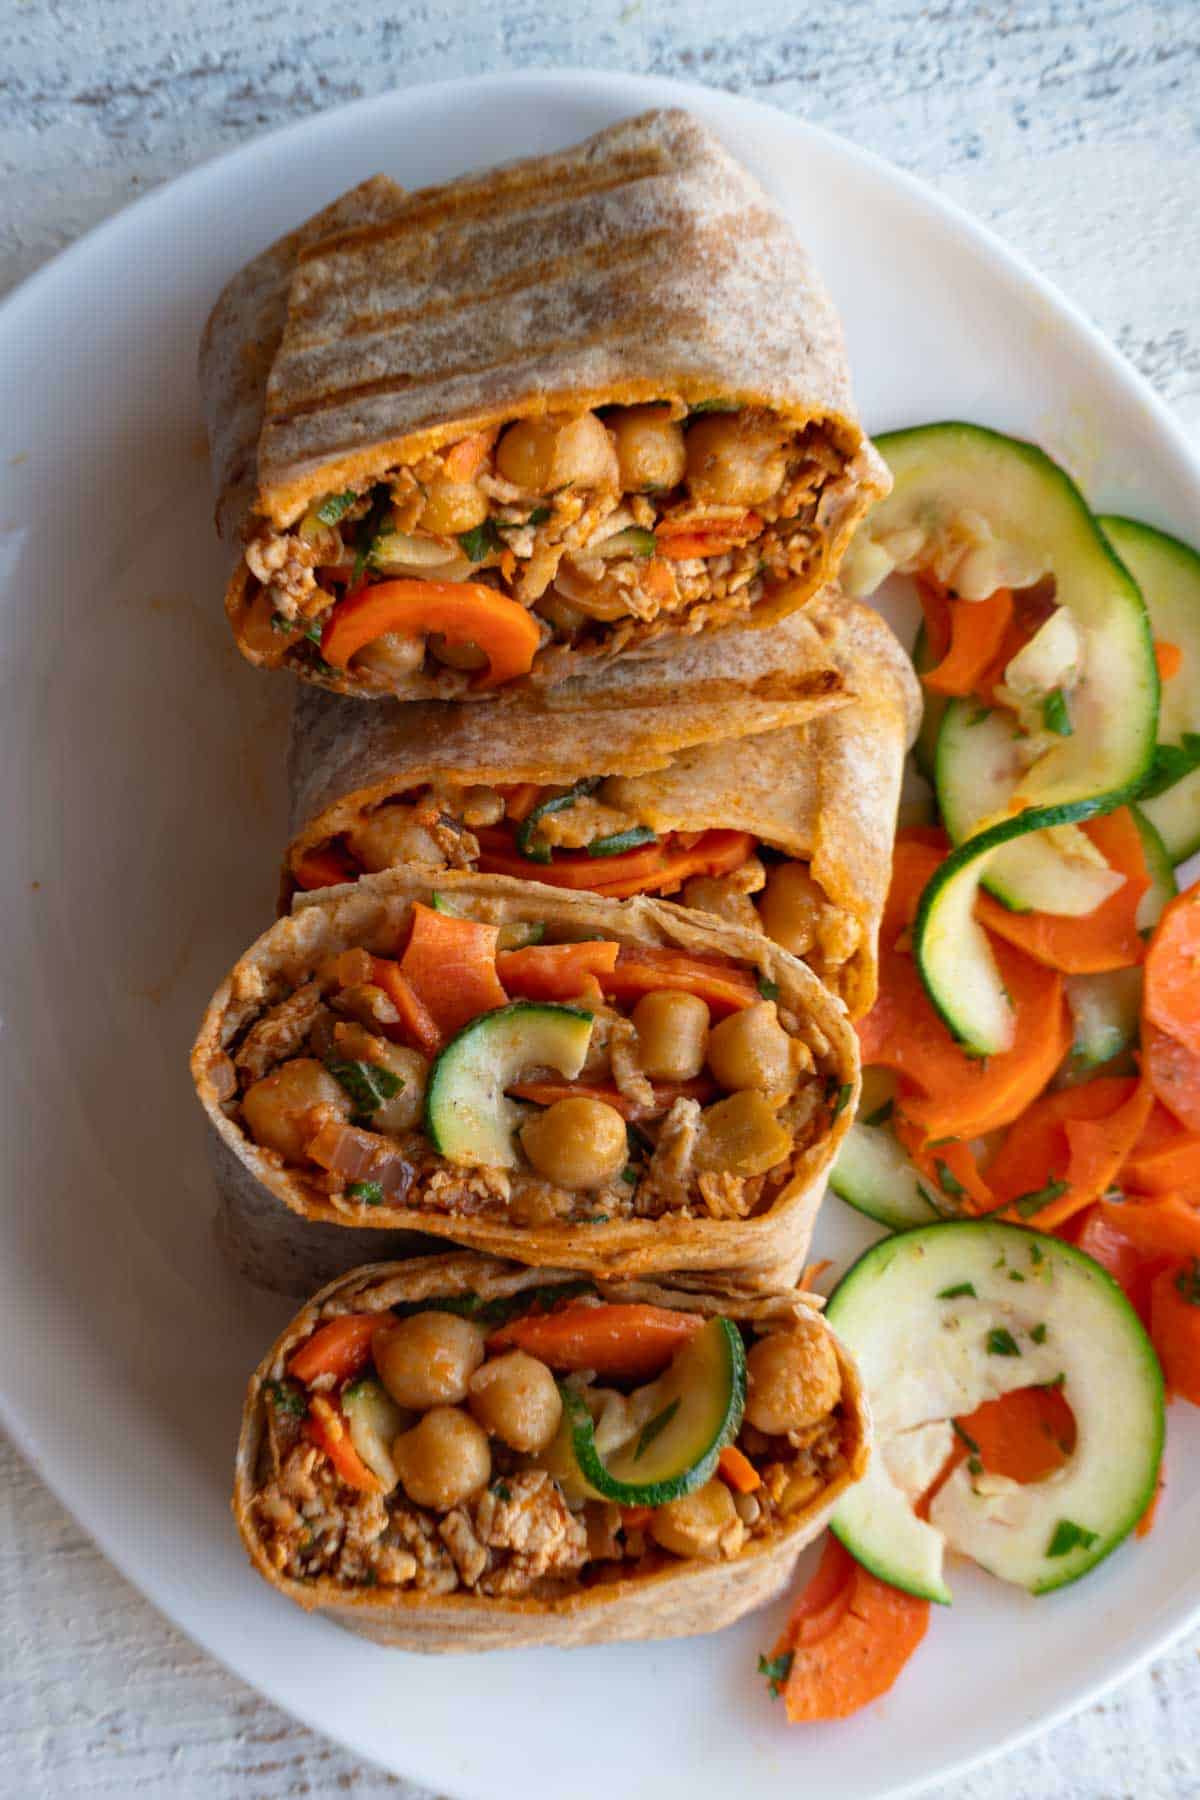 Two high-protein veggie wraps cut open on a white plate with a carrot and zucchini salad.